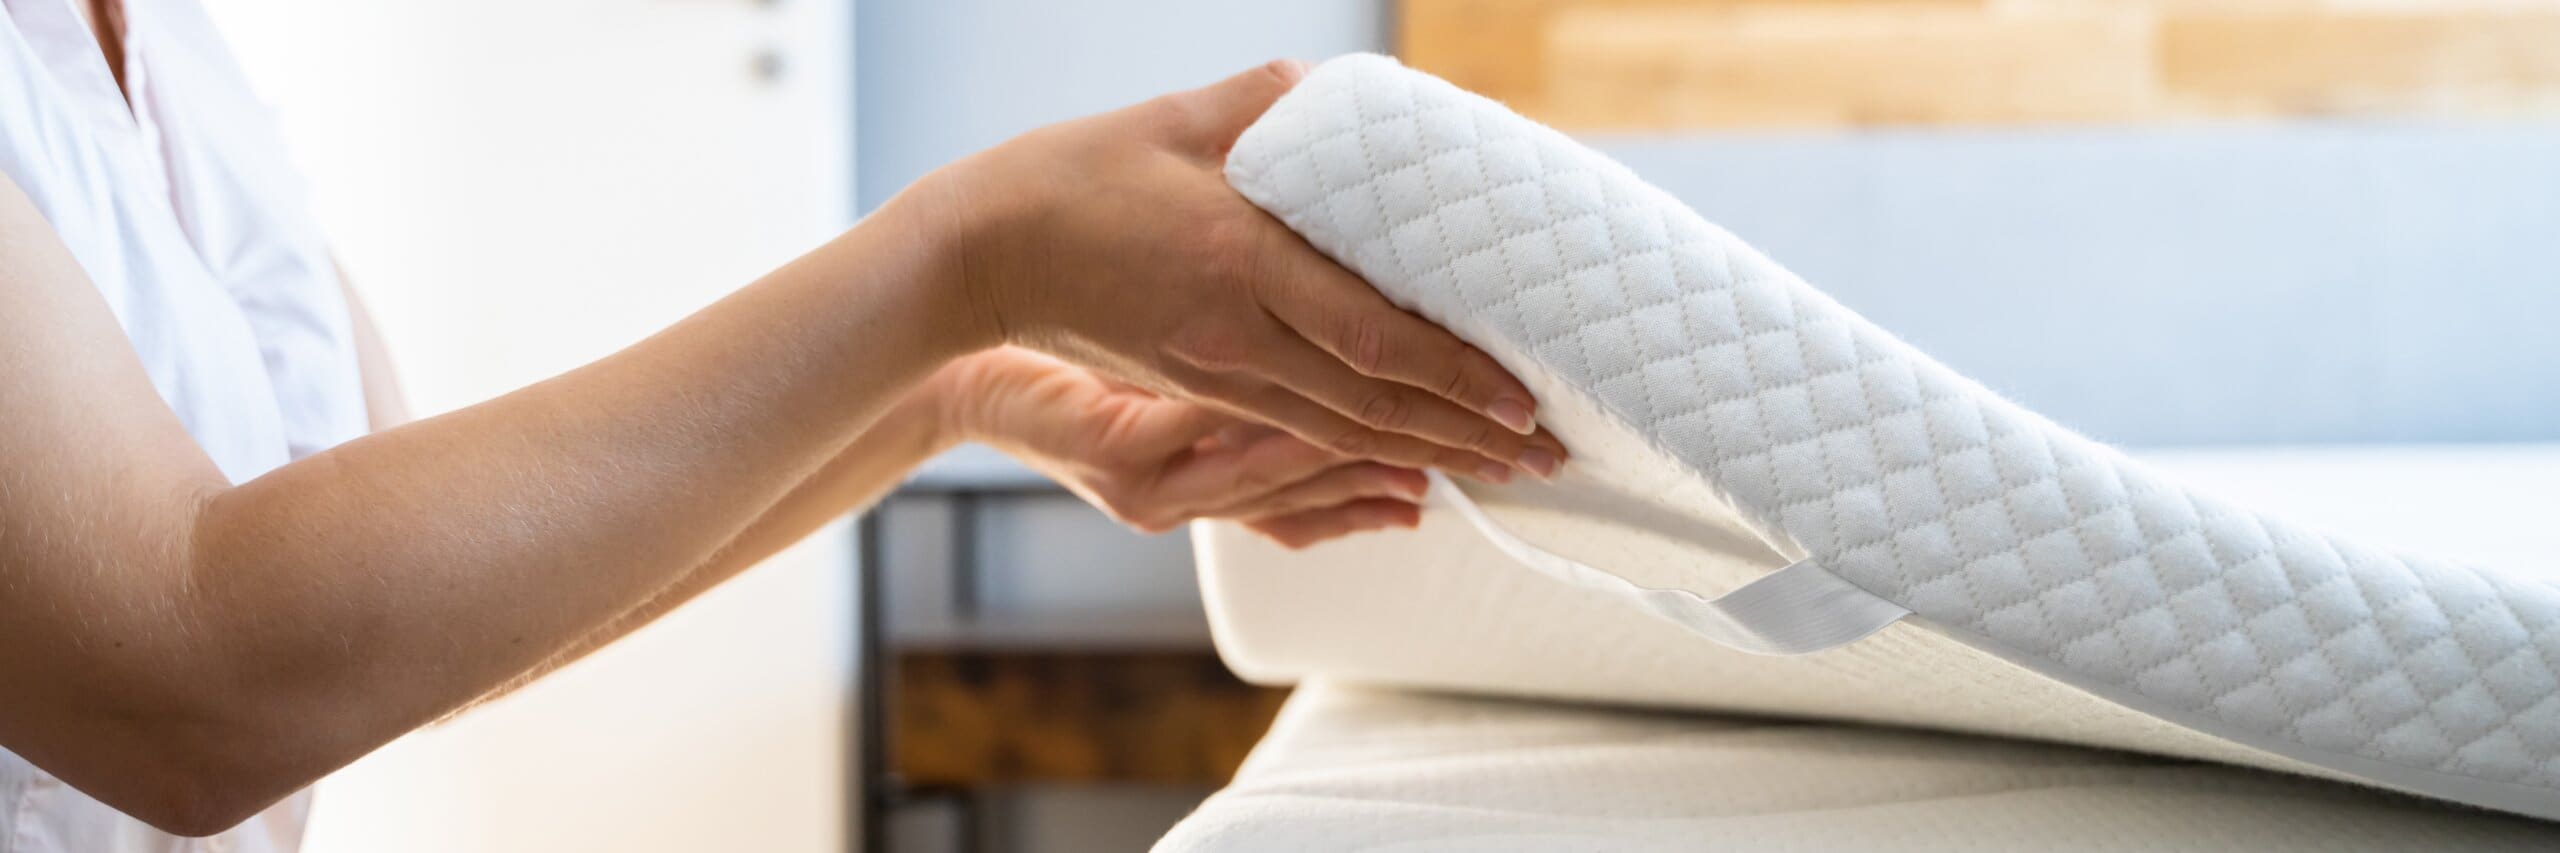 A memory foam mattress topper being placed onto a bed.